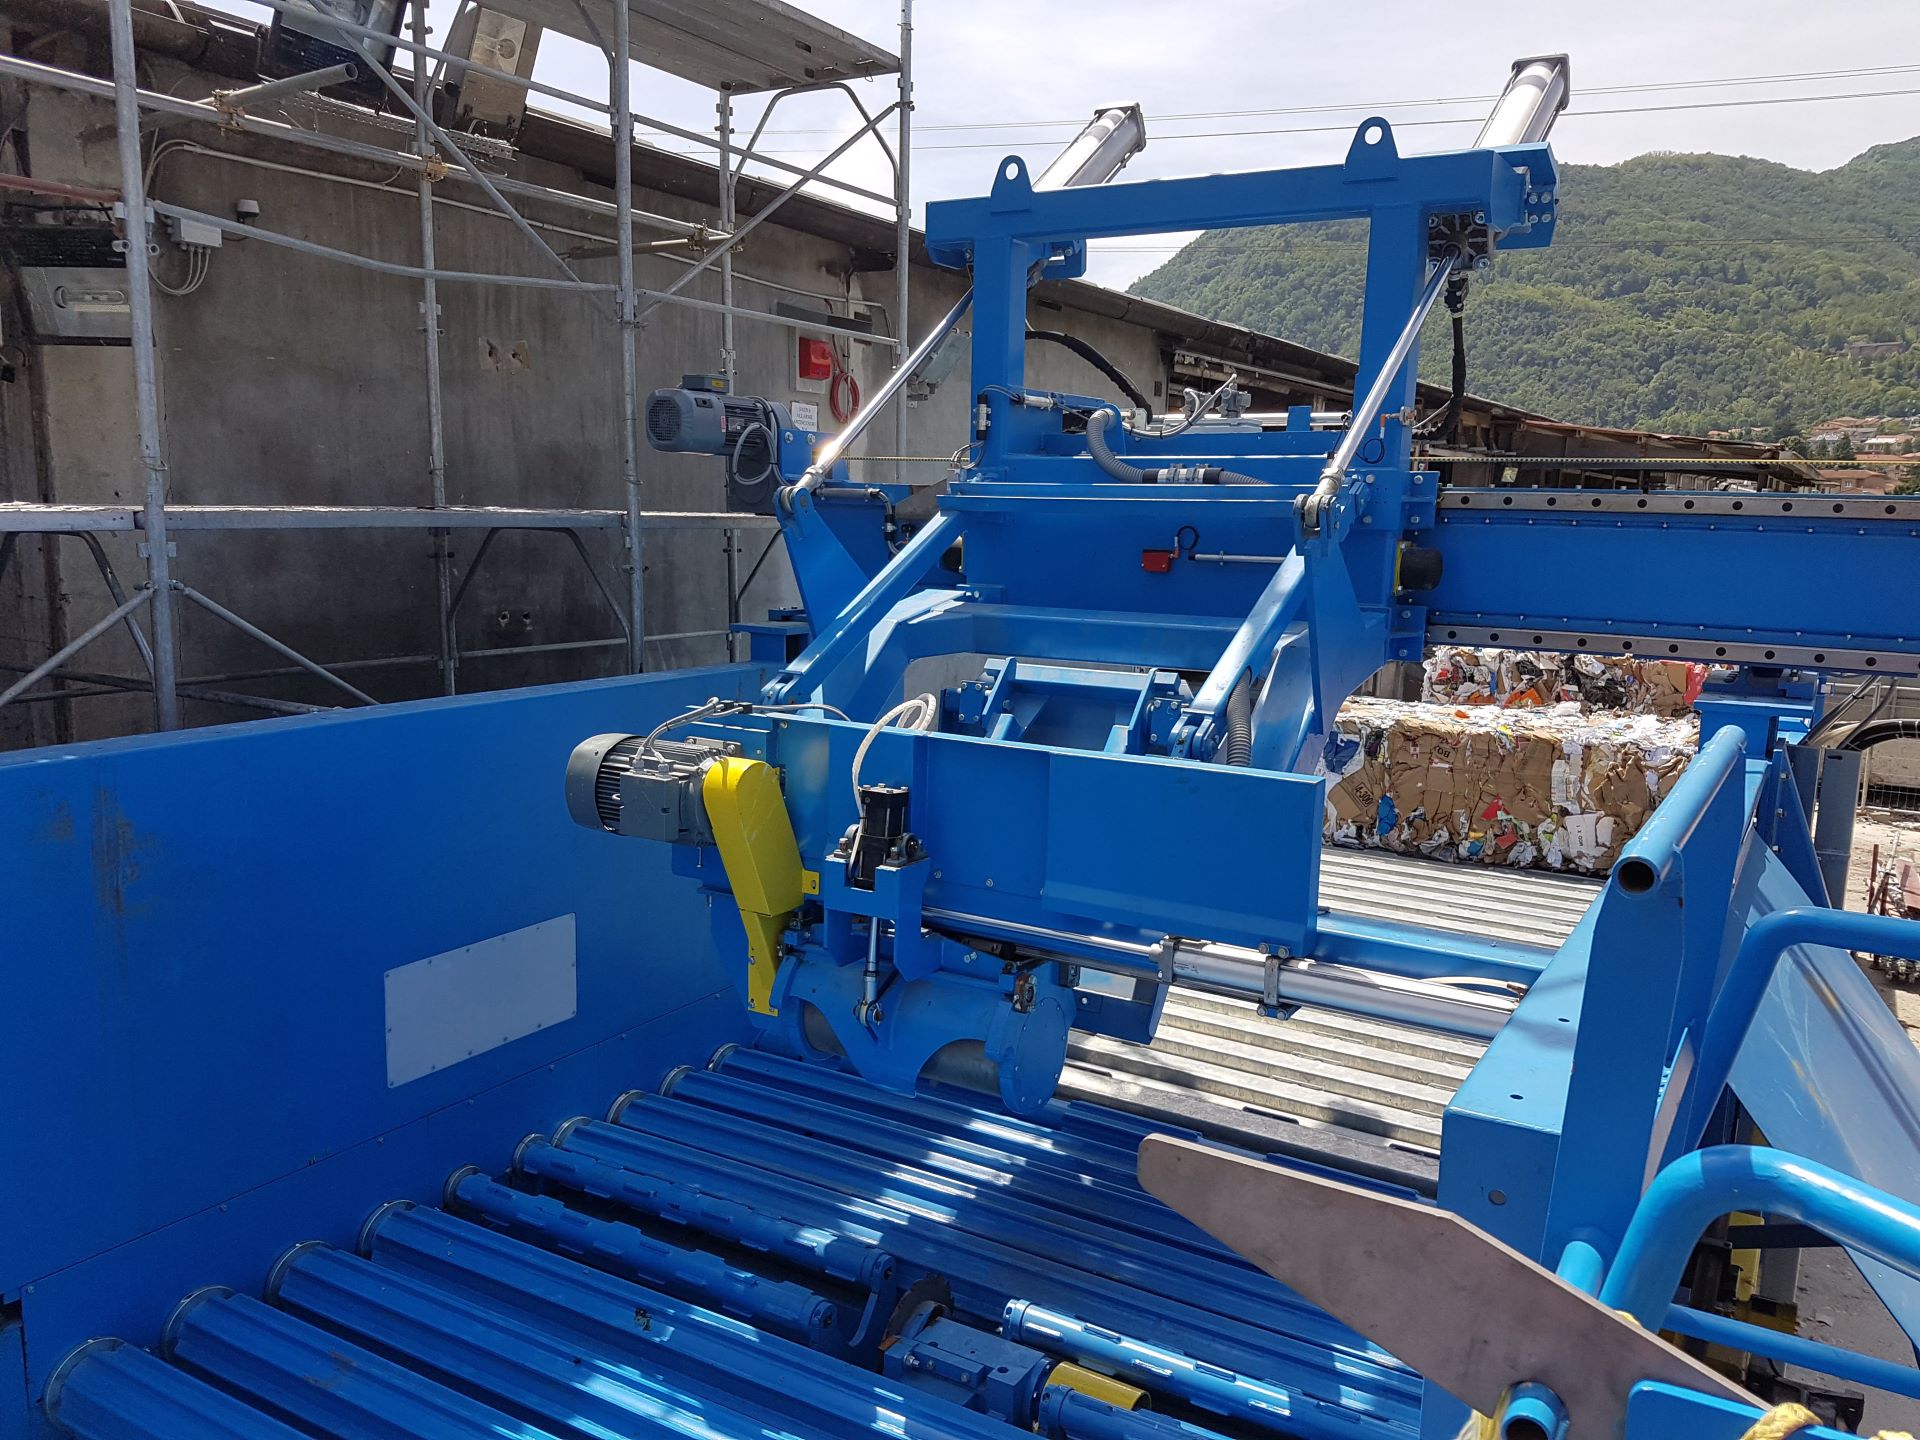 FMW Automatic Wastepaper Bale Dewiring Extractor in action